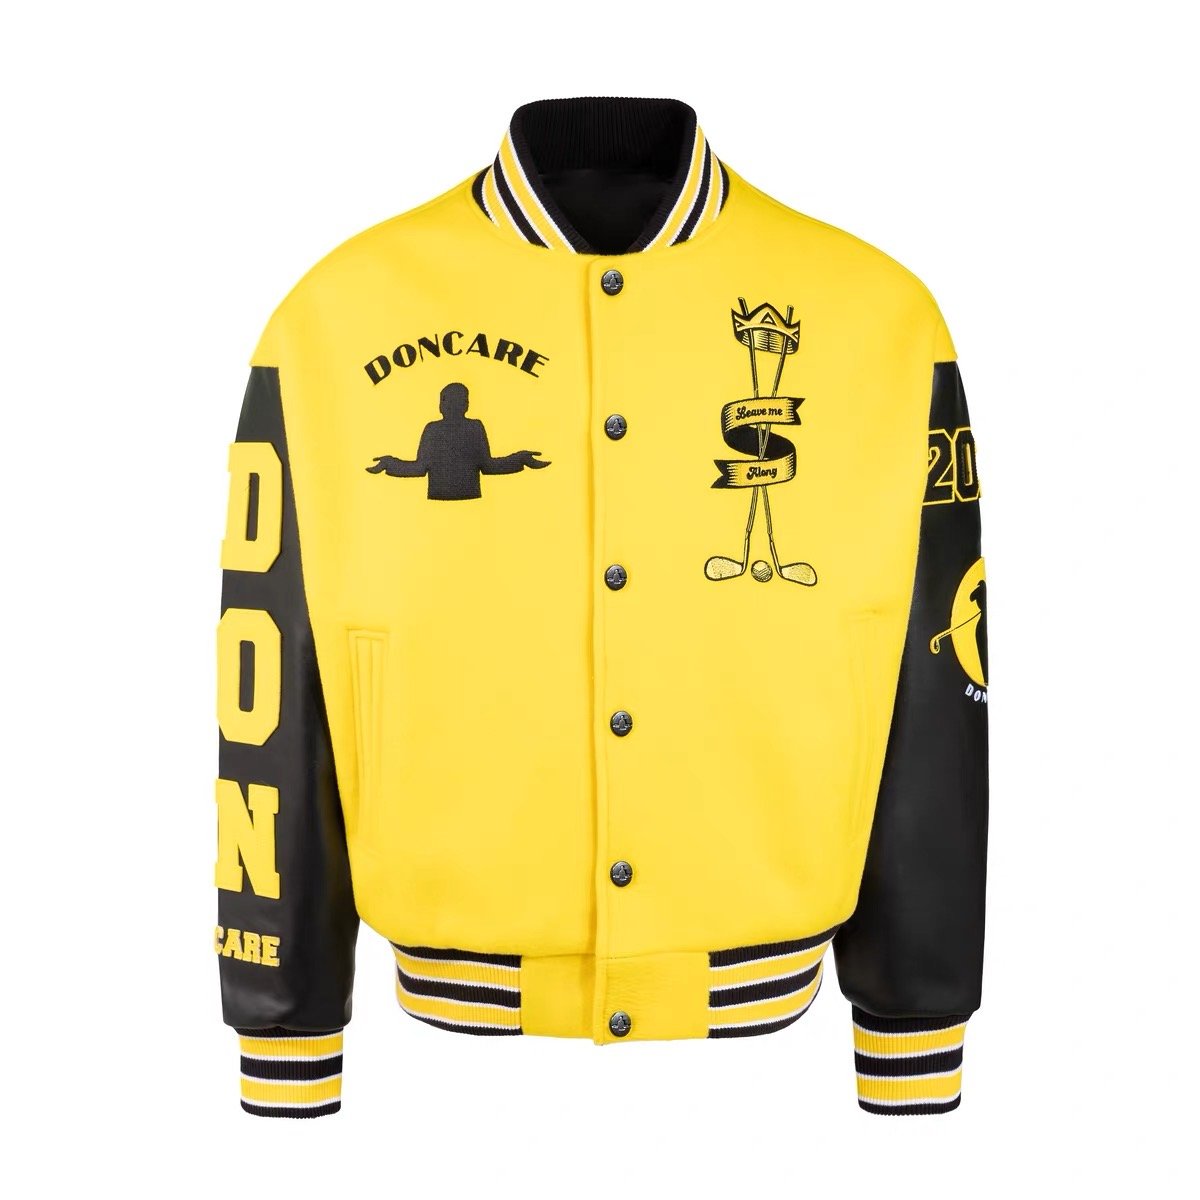 DONCARE Icon Varsity Jacket "Limited edition" - Yellow